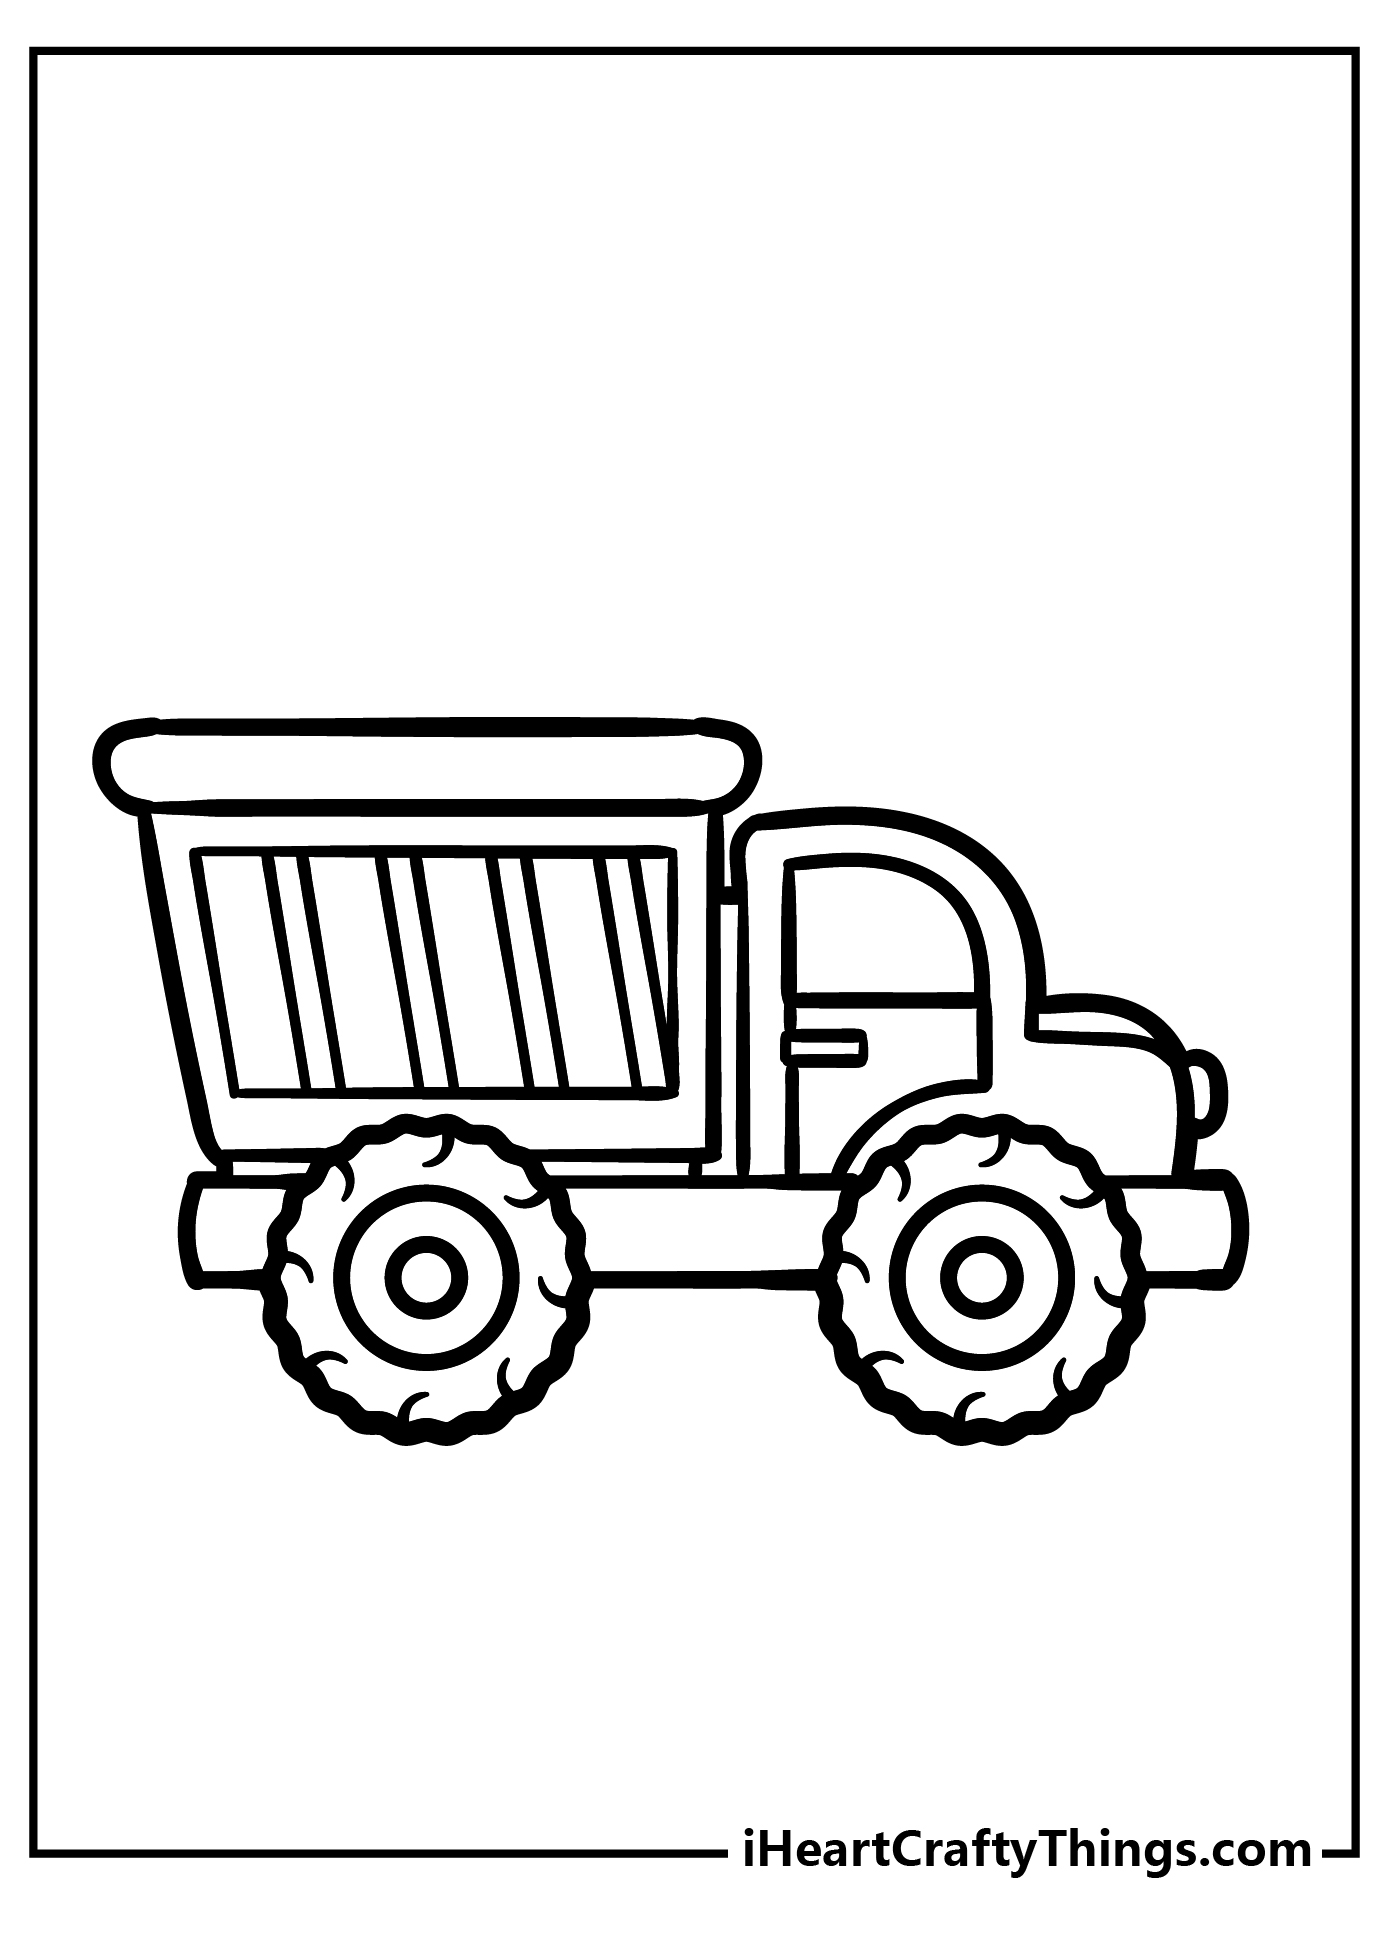 Dump Truck Coloring Book for kids free printable